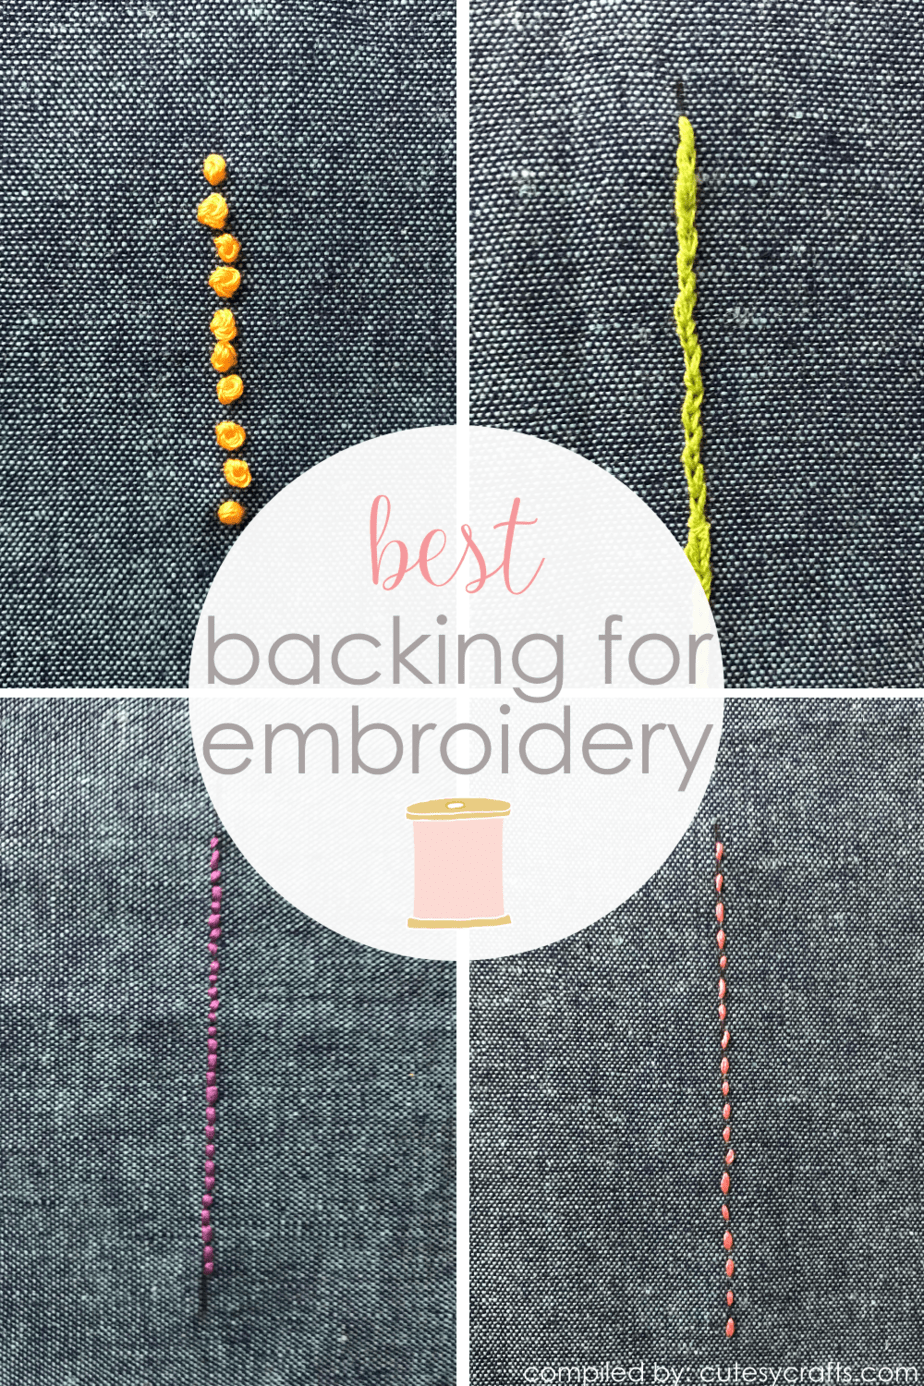 Embroidery Stabilizers Still Confusing?